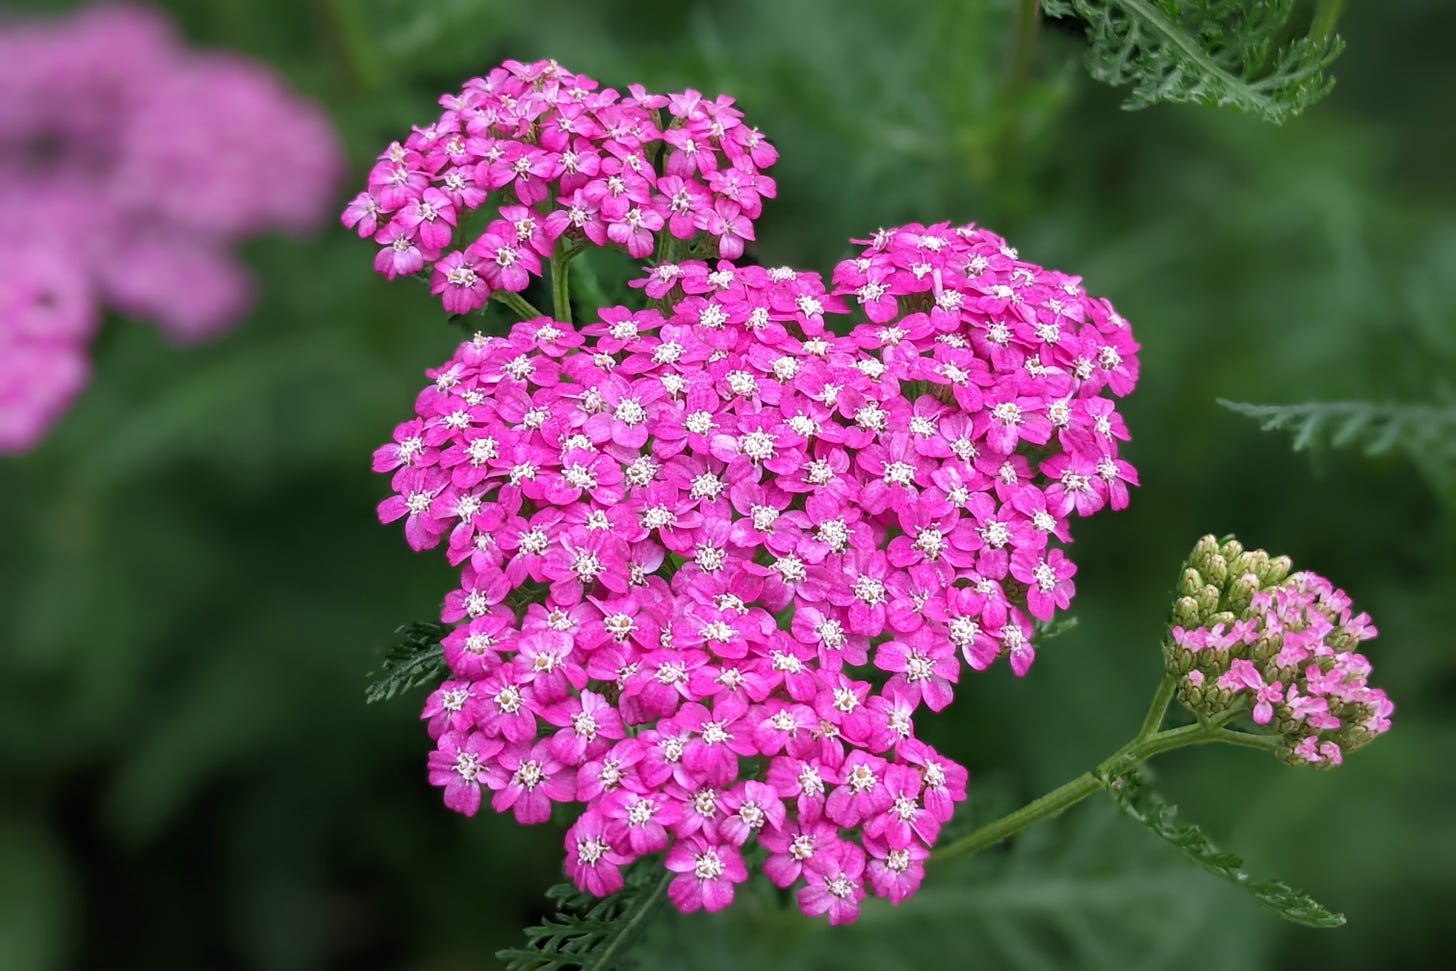 Photograph of plant with clusters of small, bright pink blooms against a verdant background.